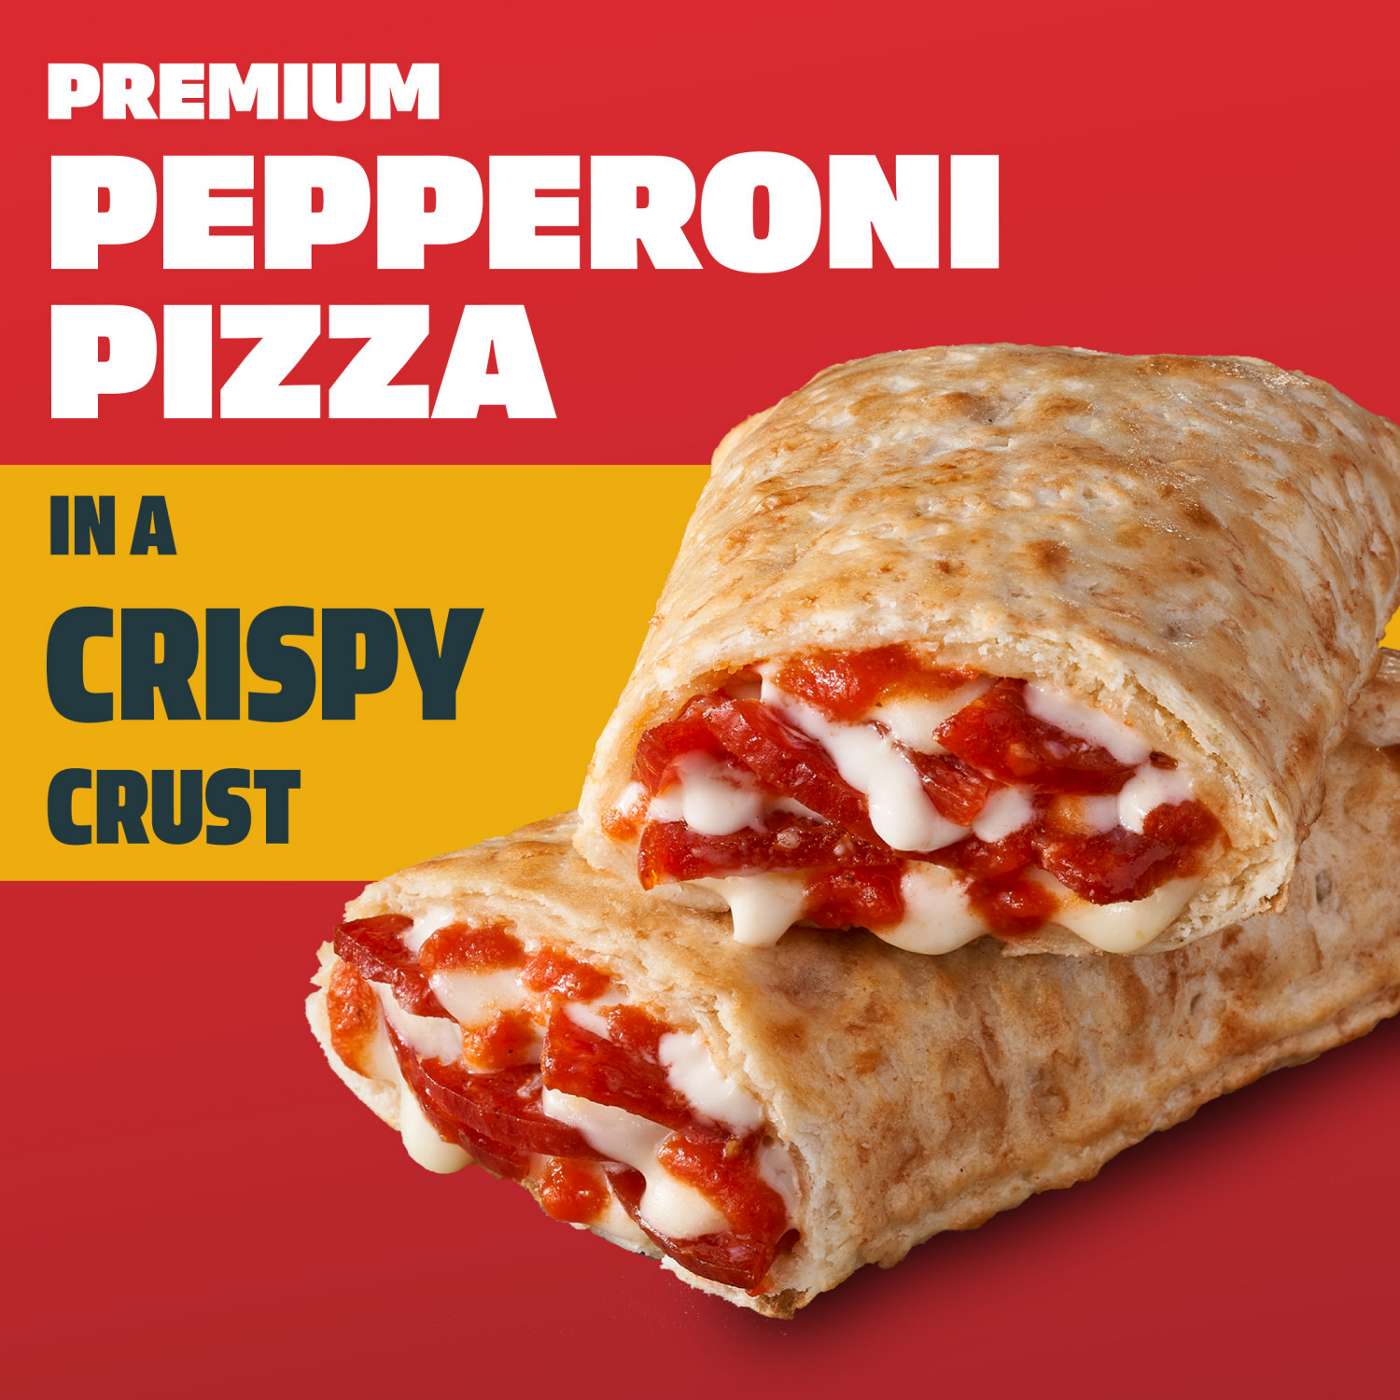 Hot Pockets Hot Pockets Pepperoni Pizza Crispy Crust Frozen Snacks, Pizza Snacks Made with Mozzarella Cheese, 12 Count Frozen Sandwiches 54 oz.; image 7 of 7